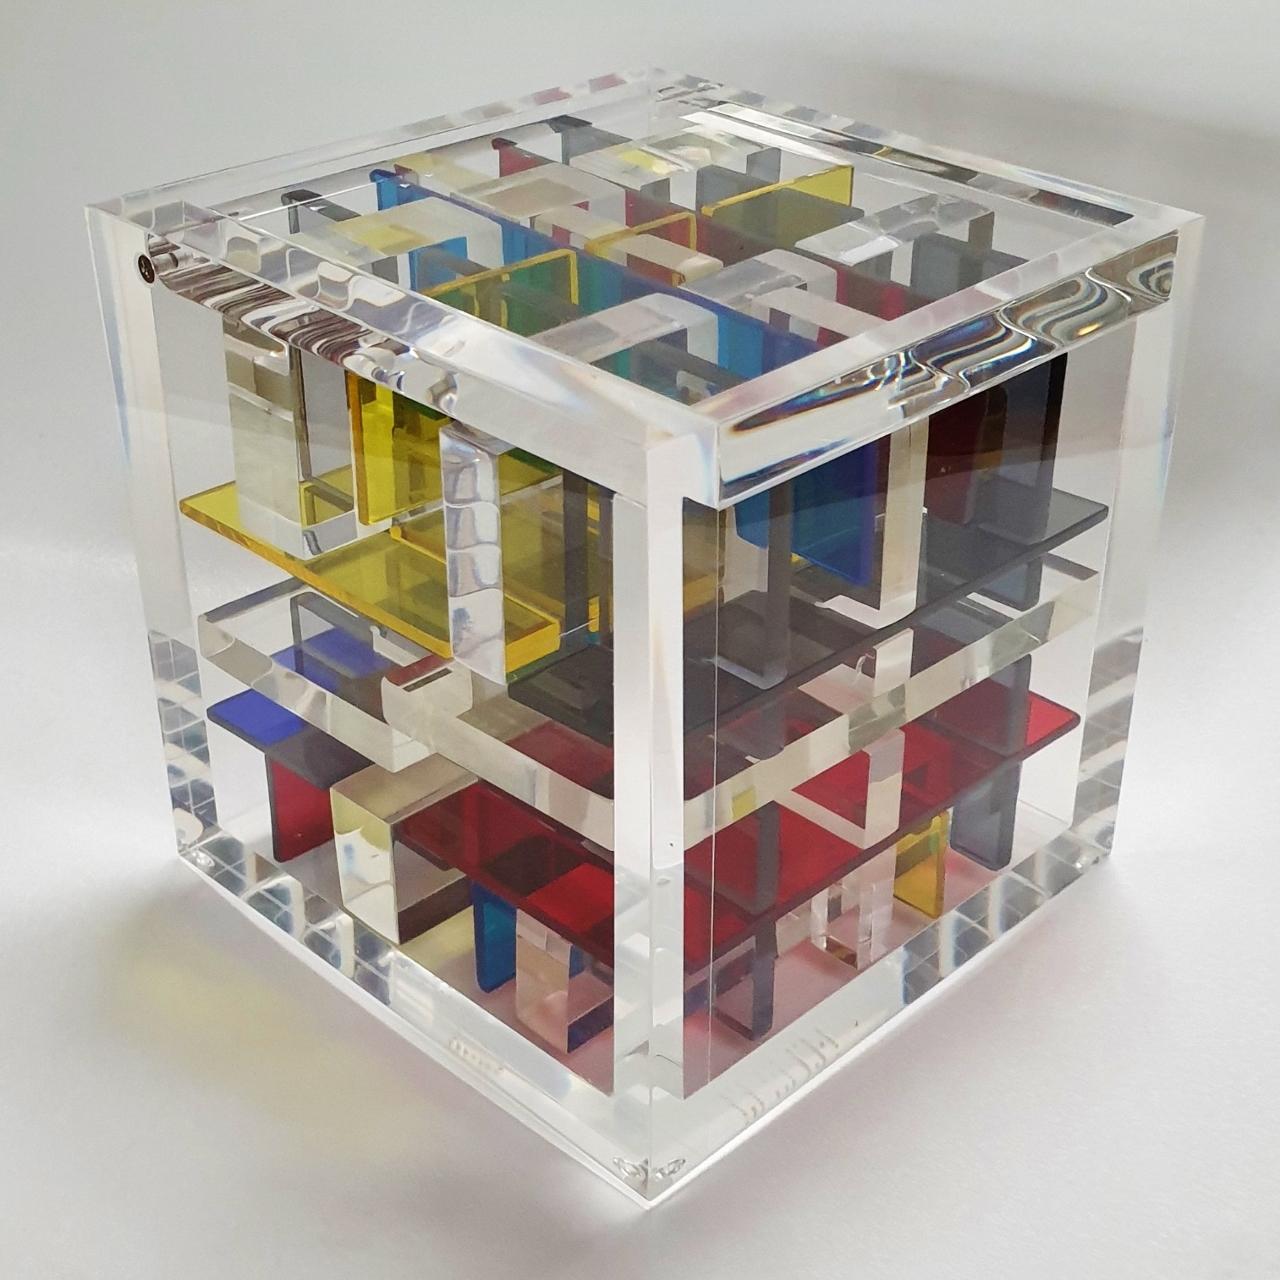 Haringa + Olijve Abstract Sculpture - New York City - contemporary modern abstract geometric cube sculpture